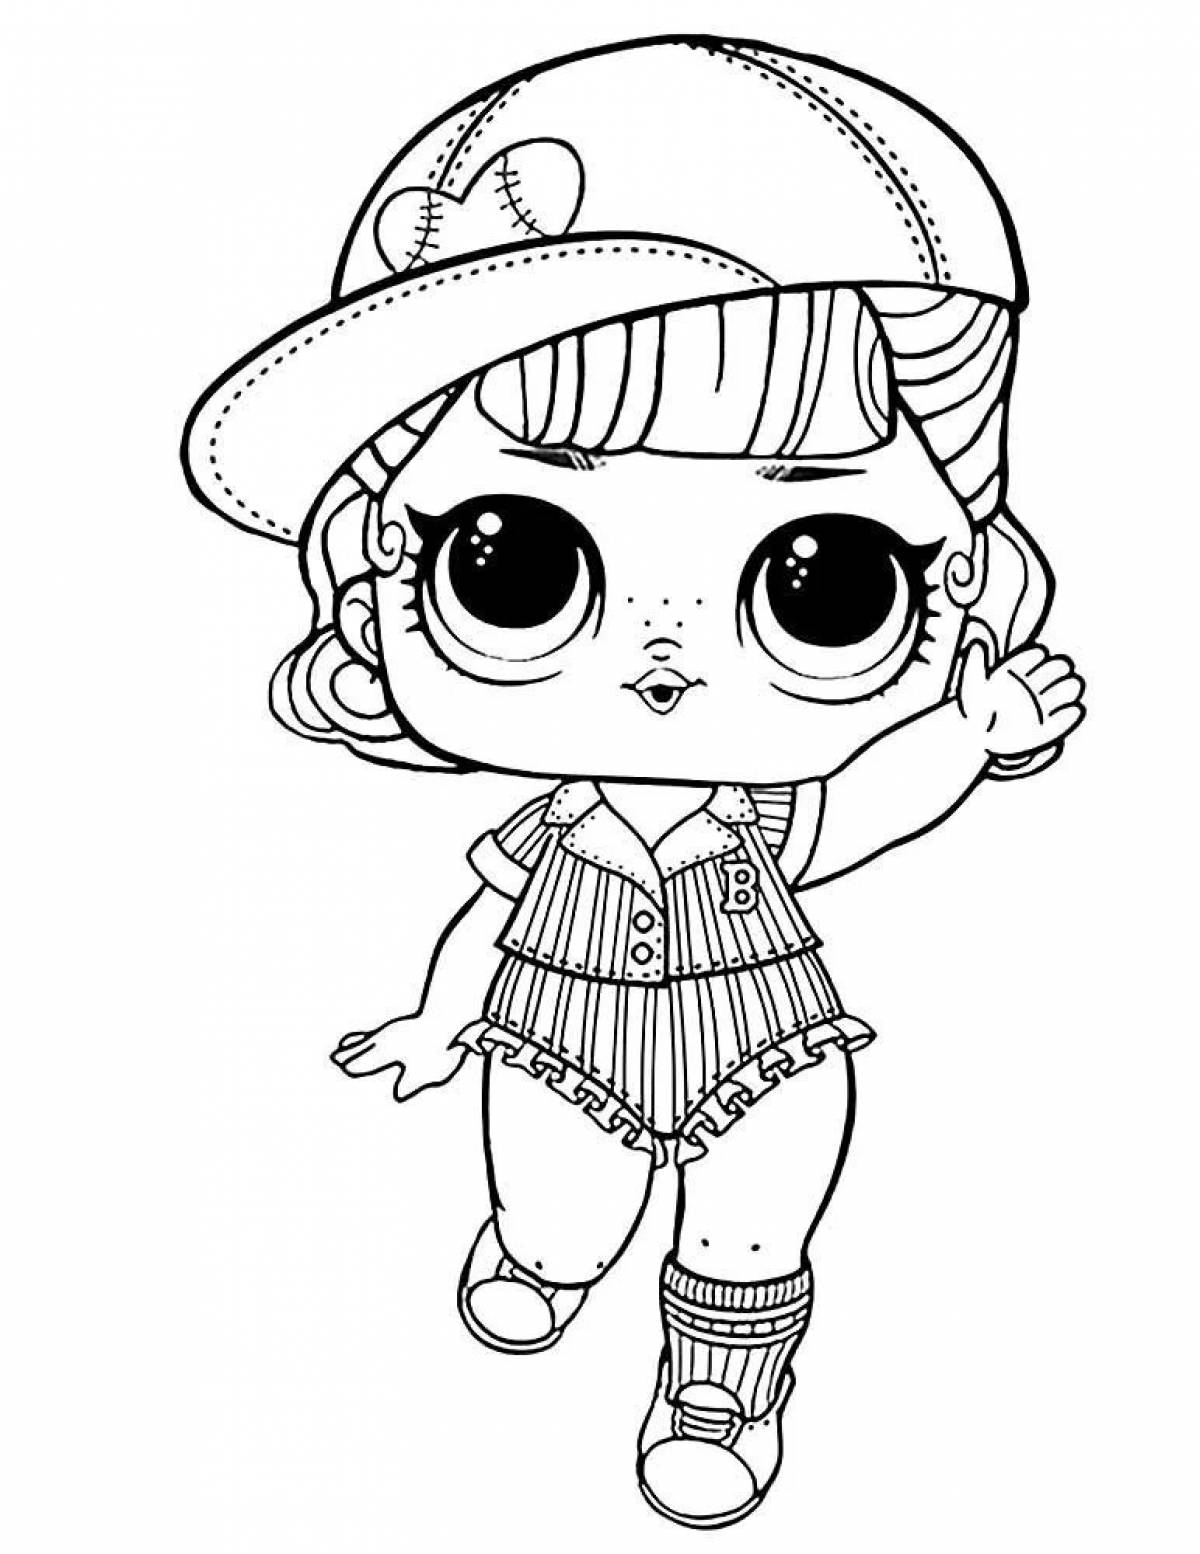 Coloring book for girls doll lol #10